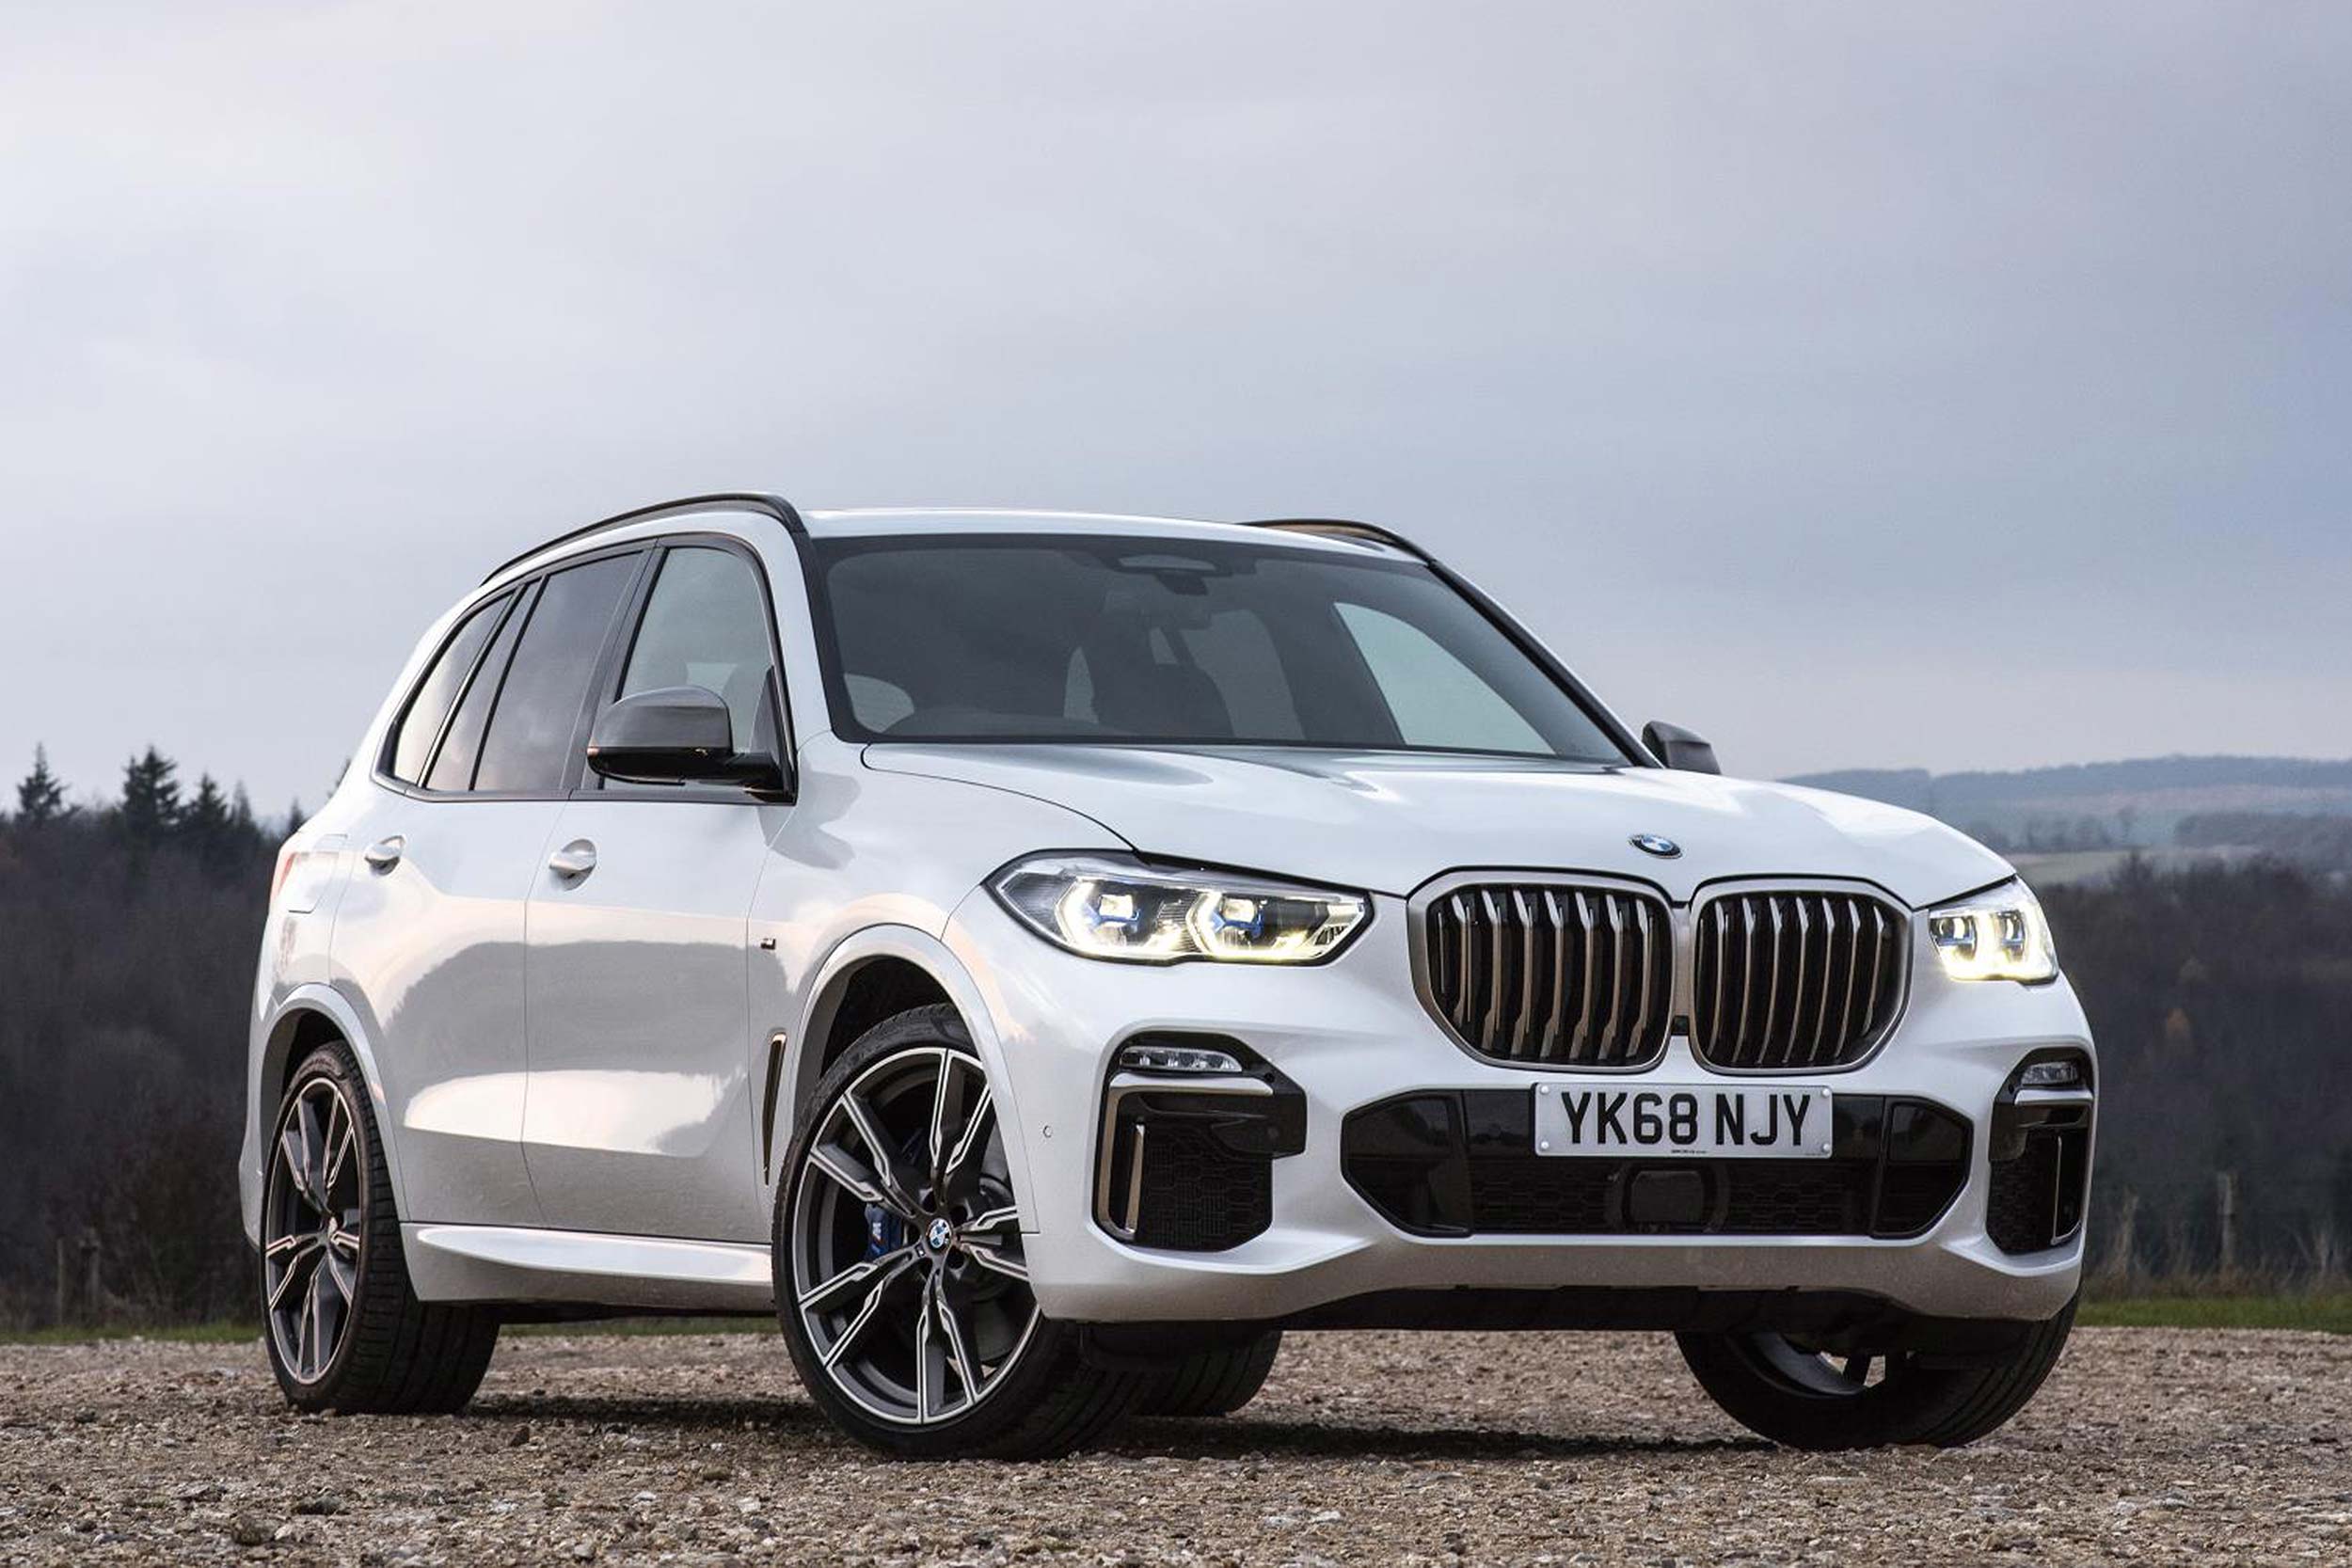 New 2019 BMW X5 lands at dealers in time for Christmas | Motoring Research